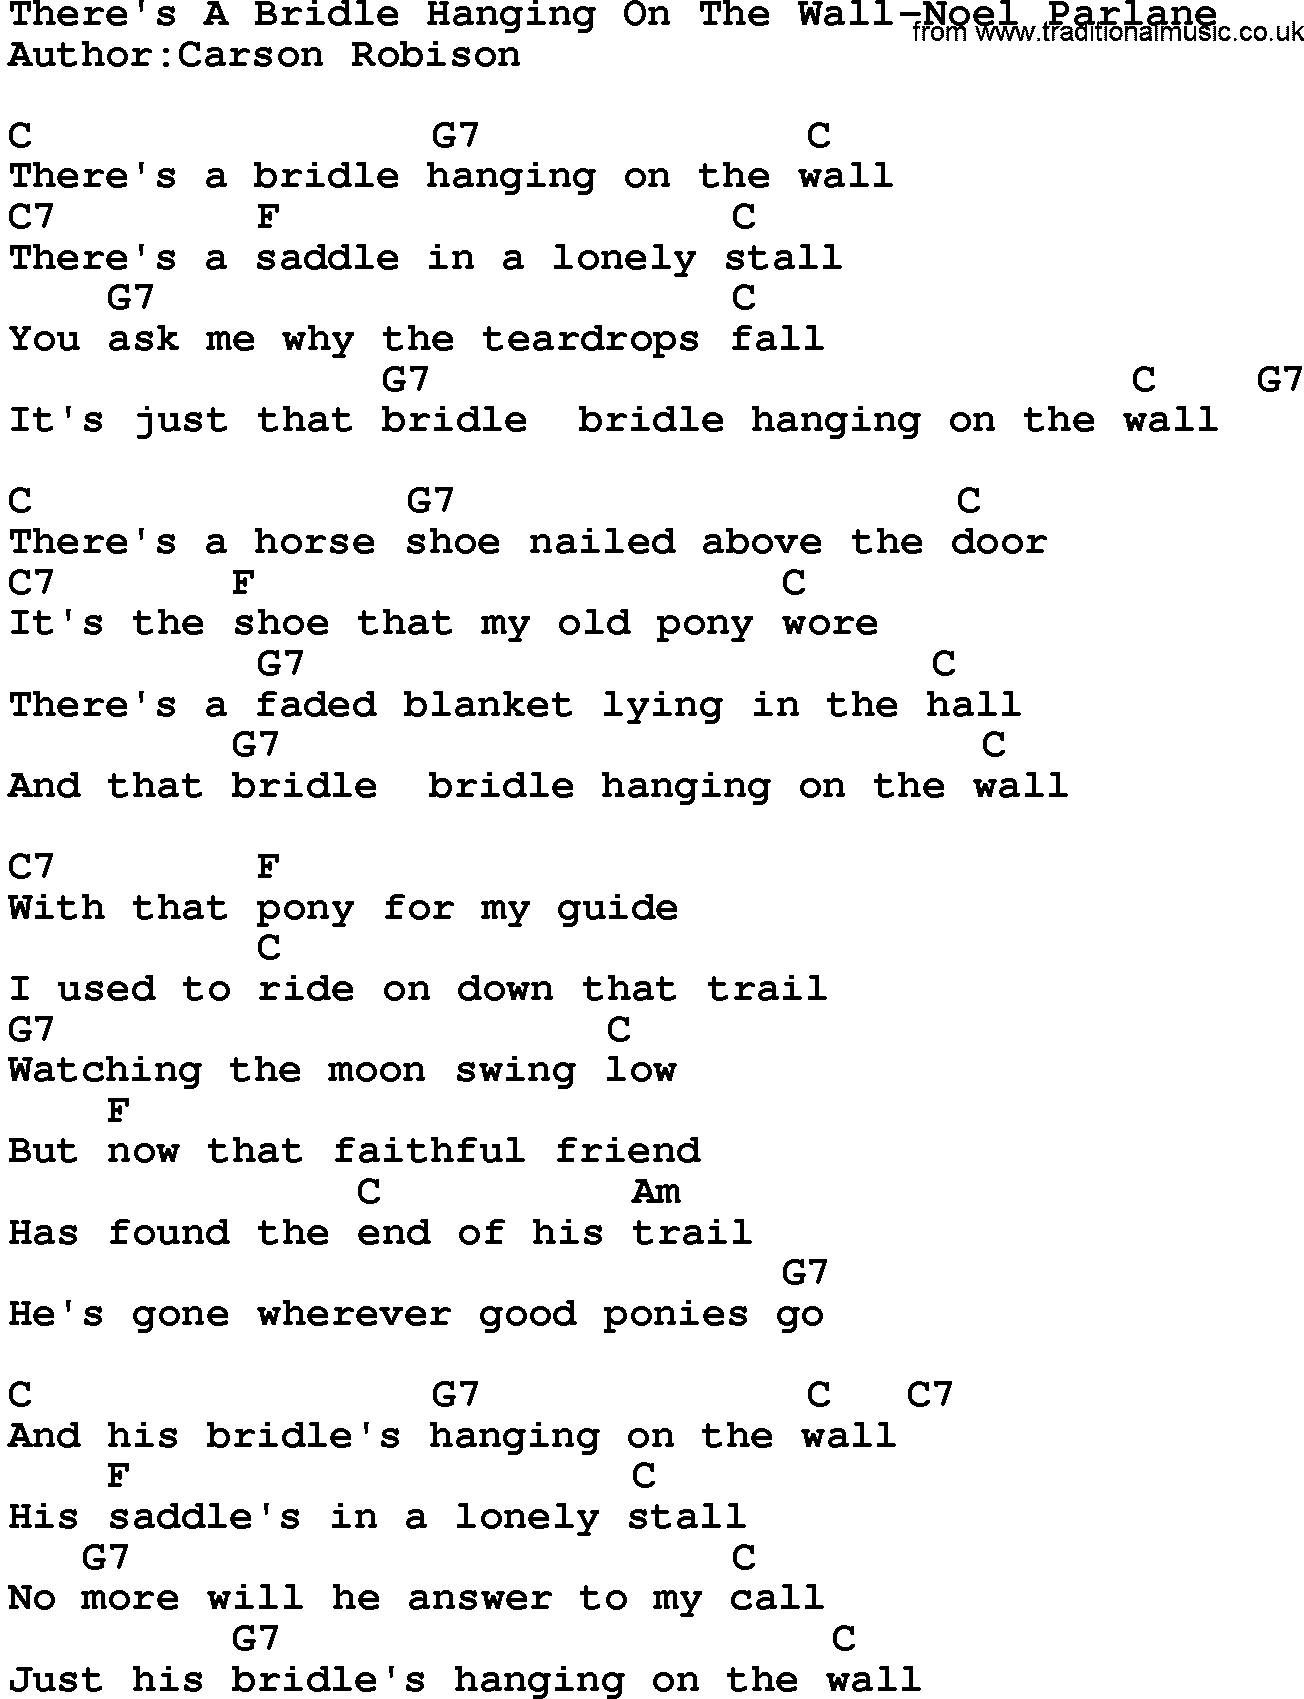 Country music song: There's A Bridle Hanging On The Wall-Noel Parlane lyrics and chords